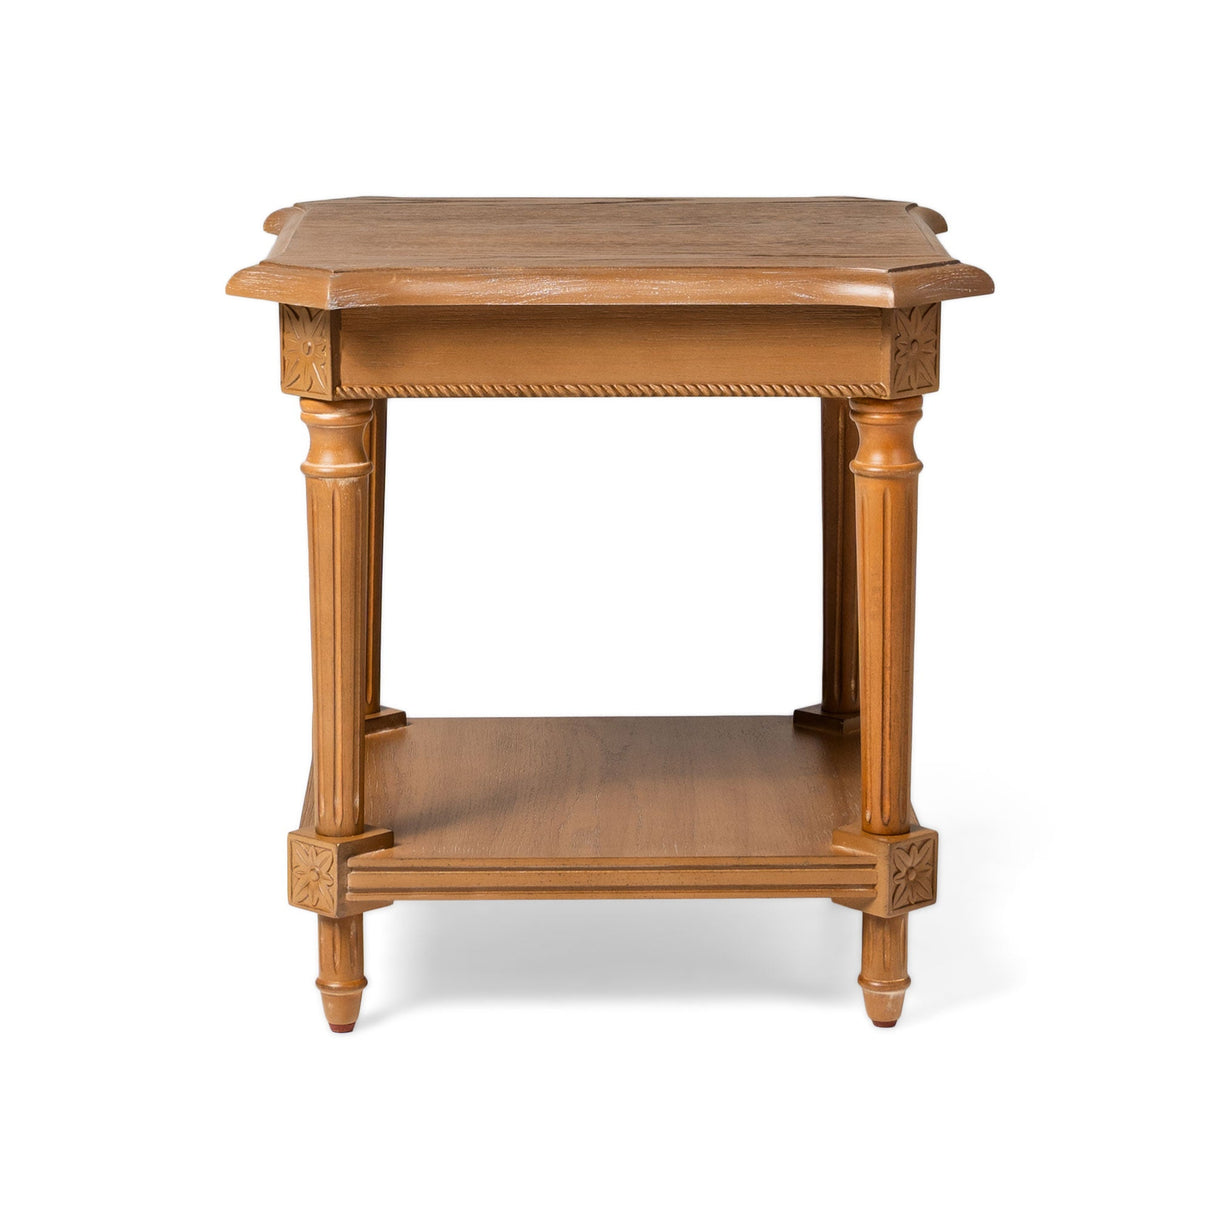 Maven Lane Pullman Traditional Square Wooden Side Table, Antiqued Natural Finish